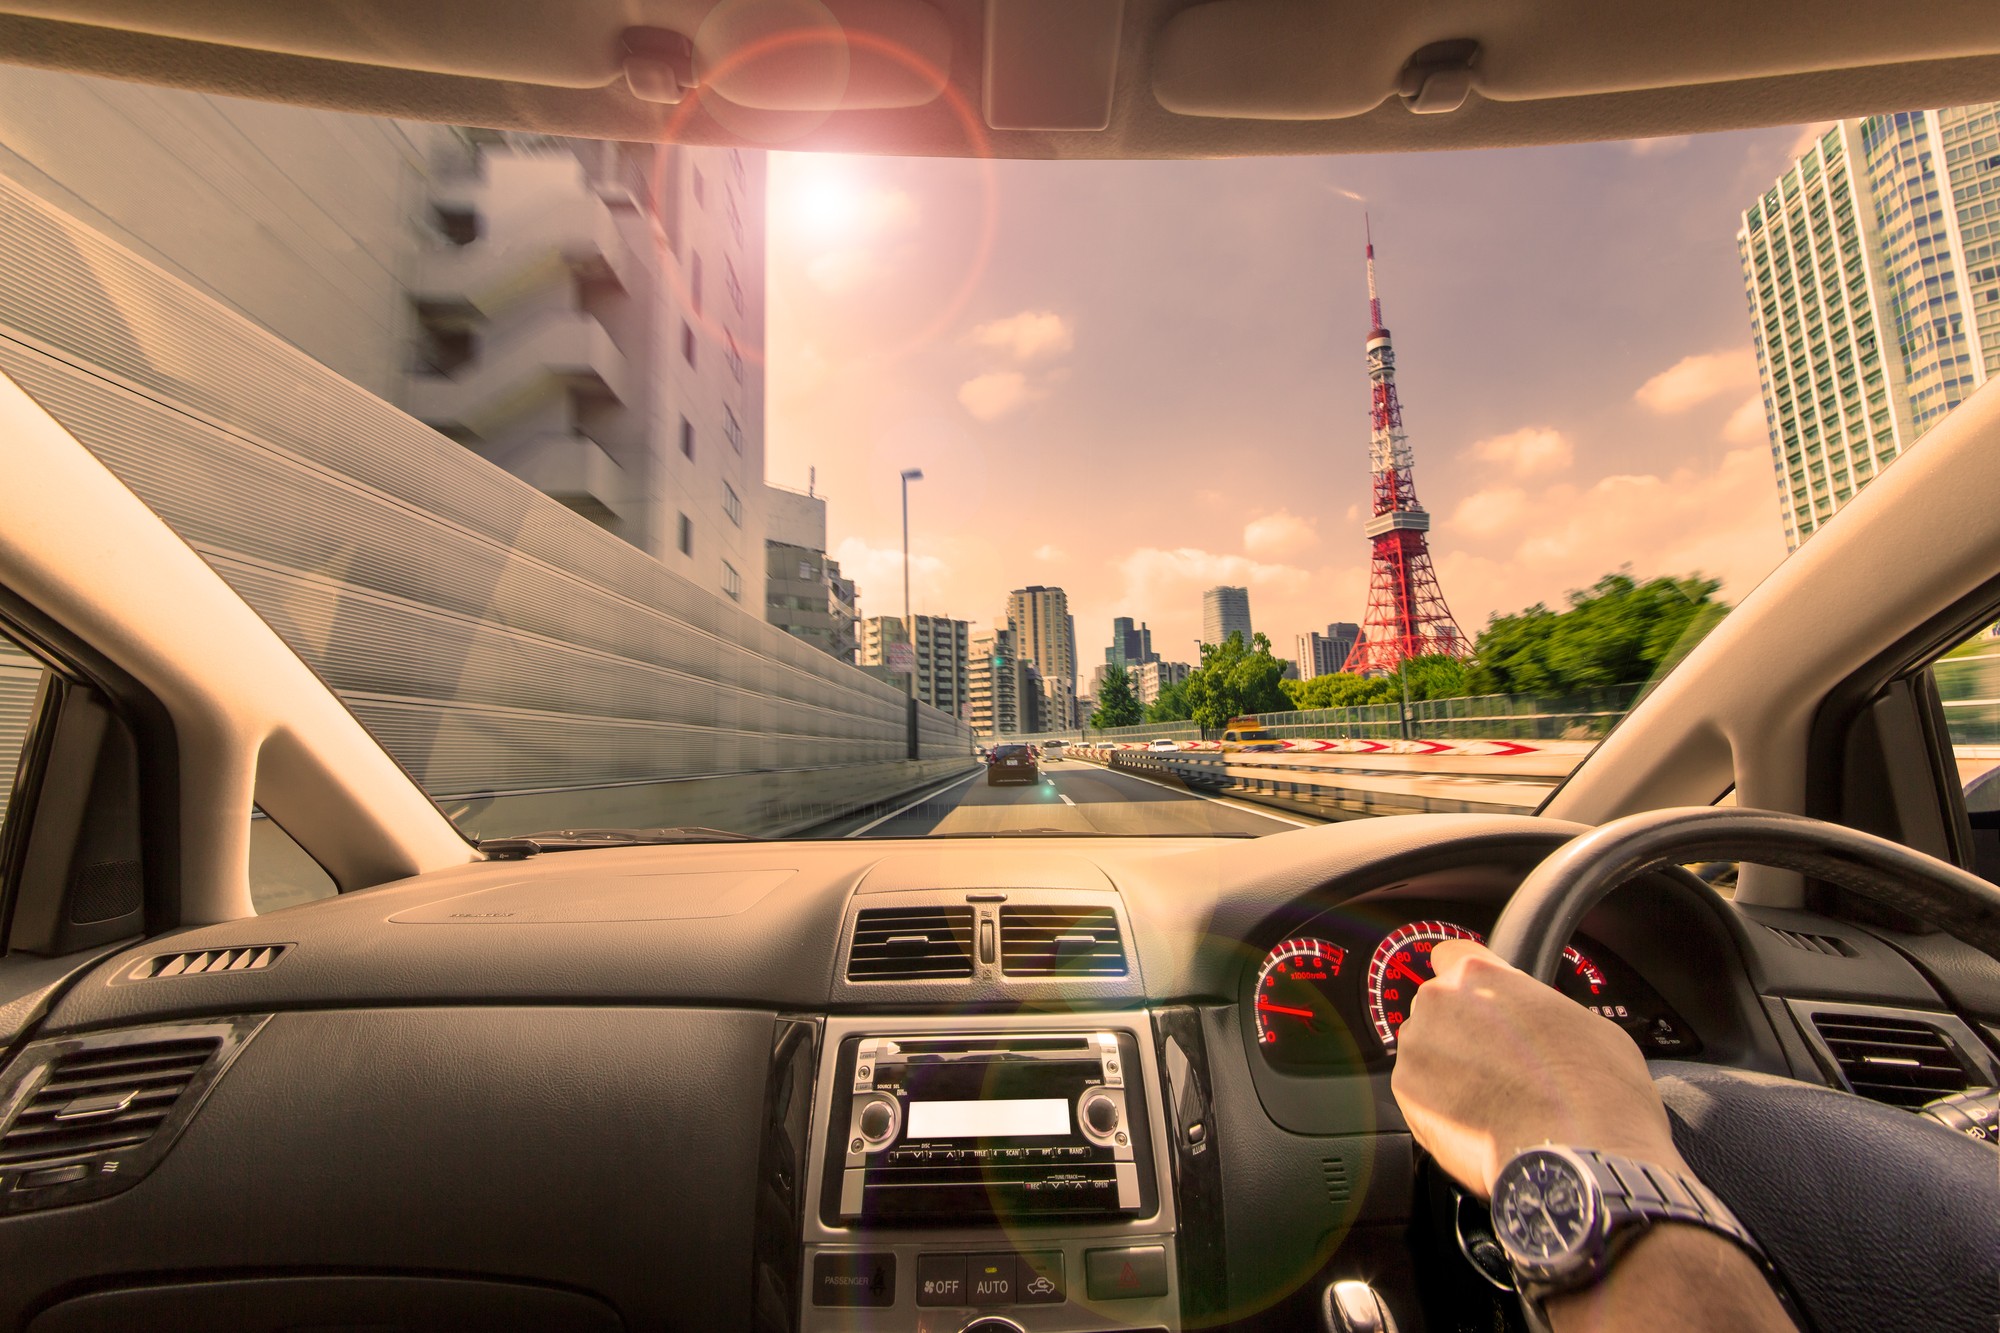 ■After all professional! How to acquire the driving skills that you think?